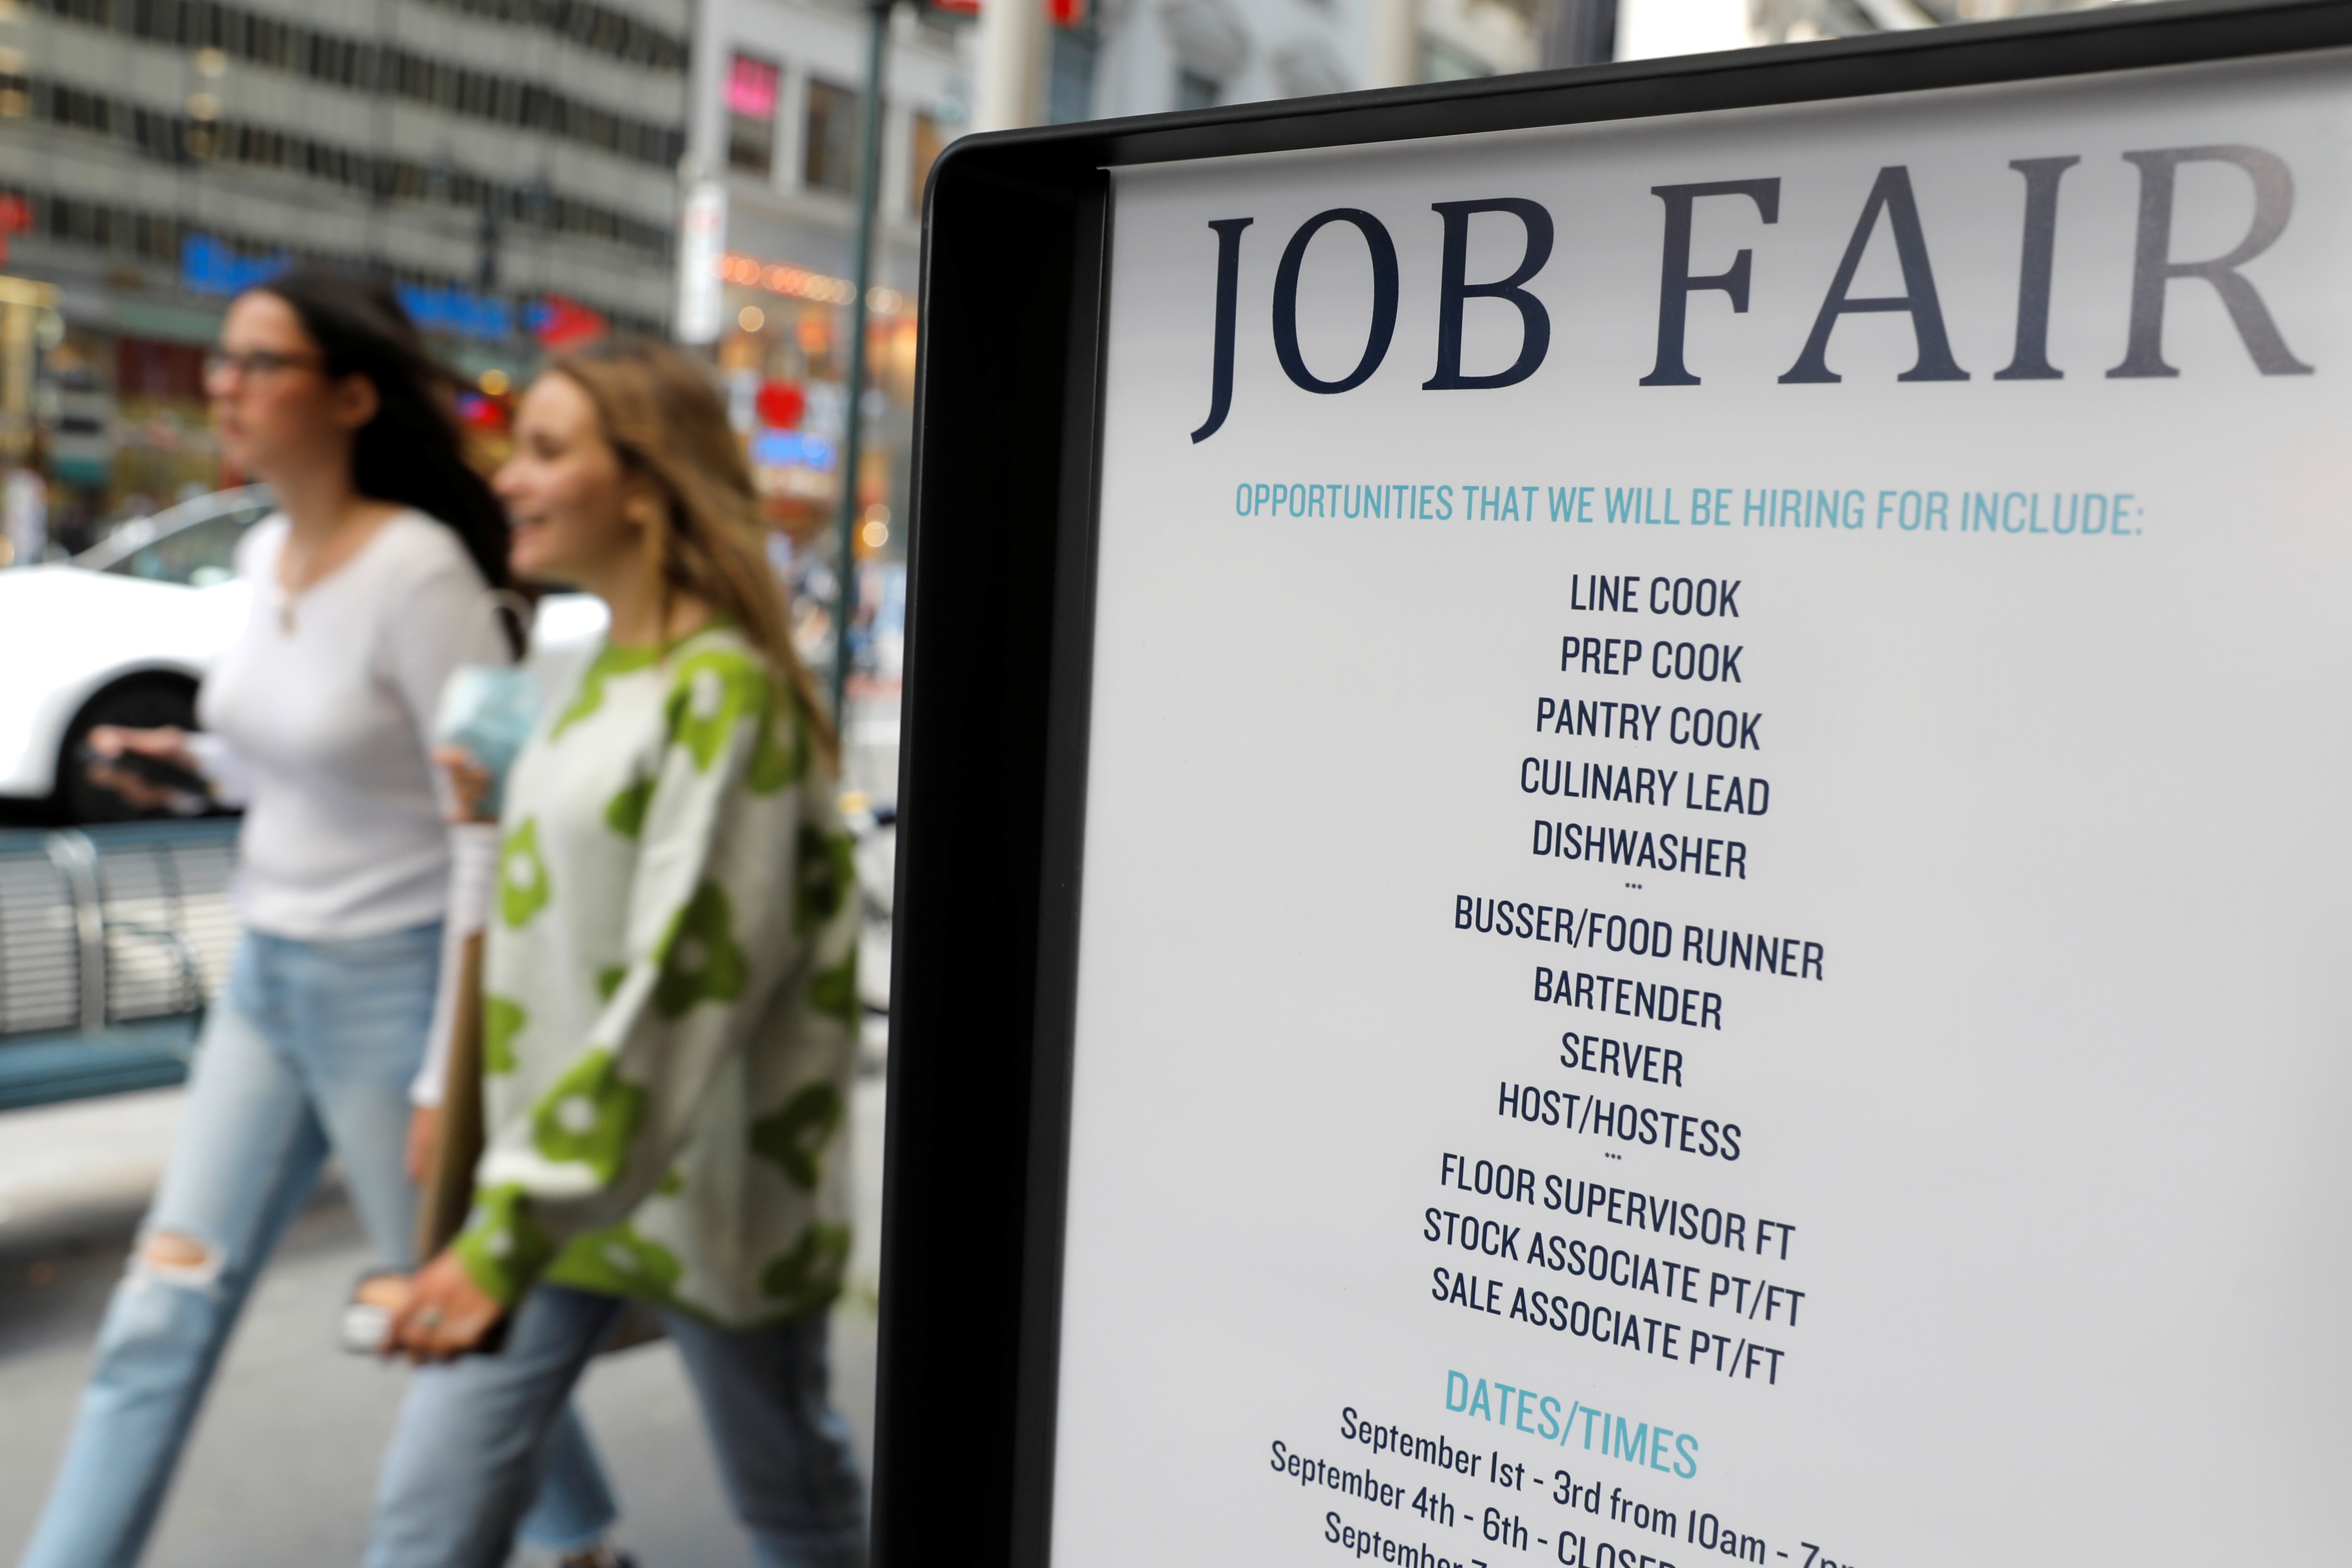 Signage for a job fair is seen on 5th Avenue after the release of the jobs report in Manhattan, New York City